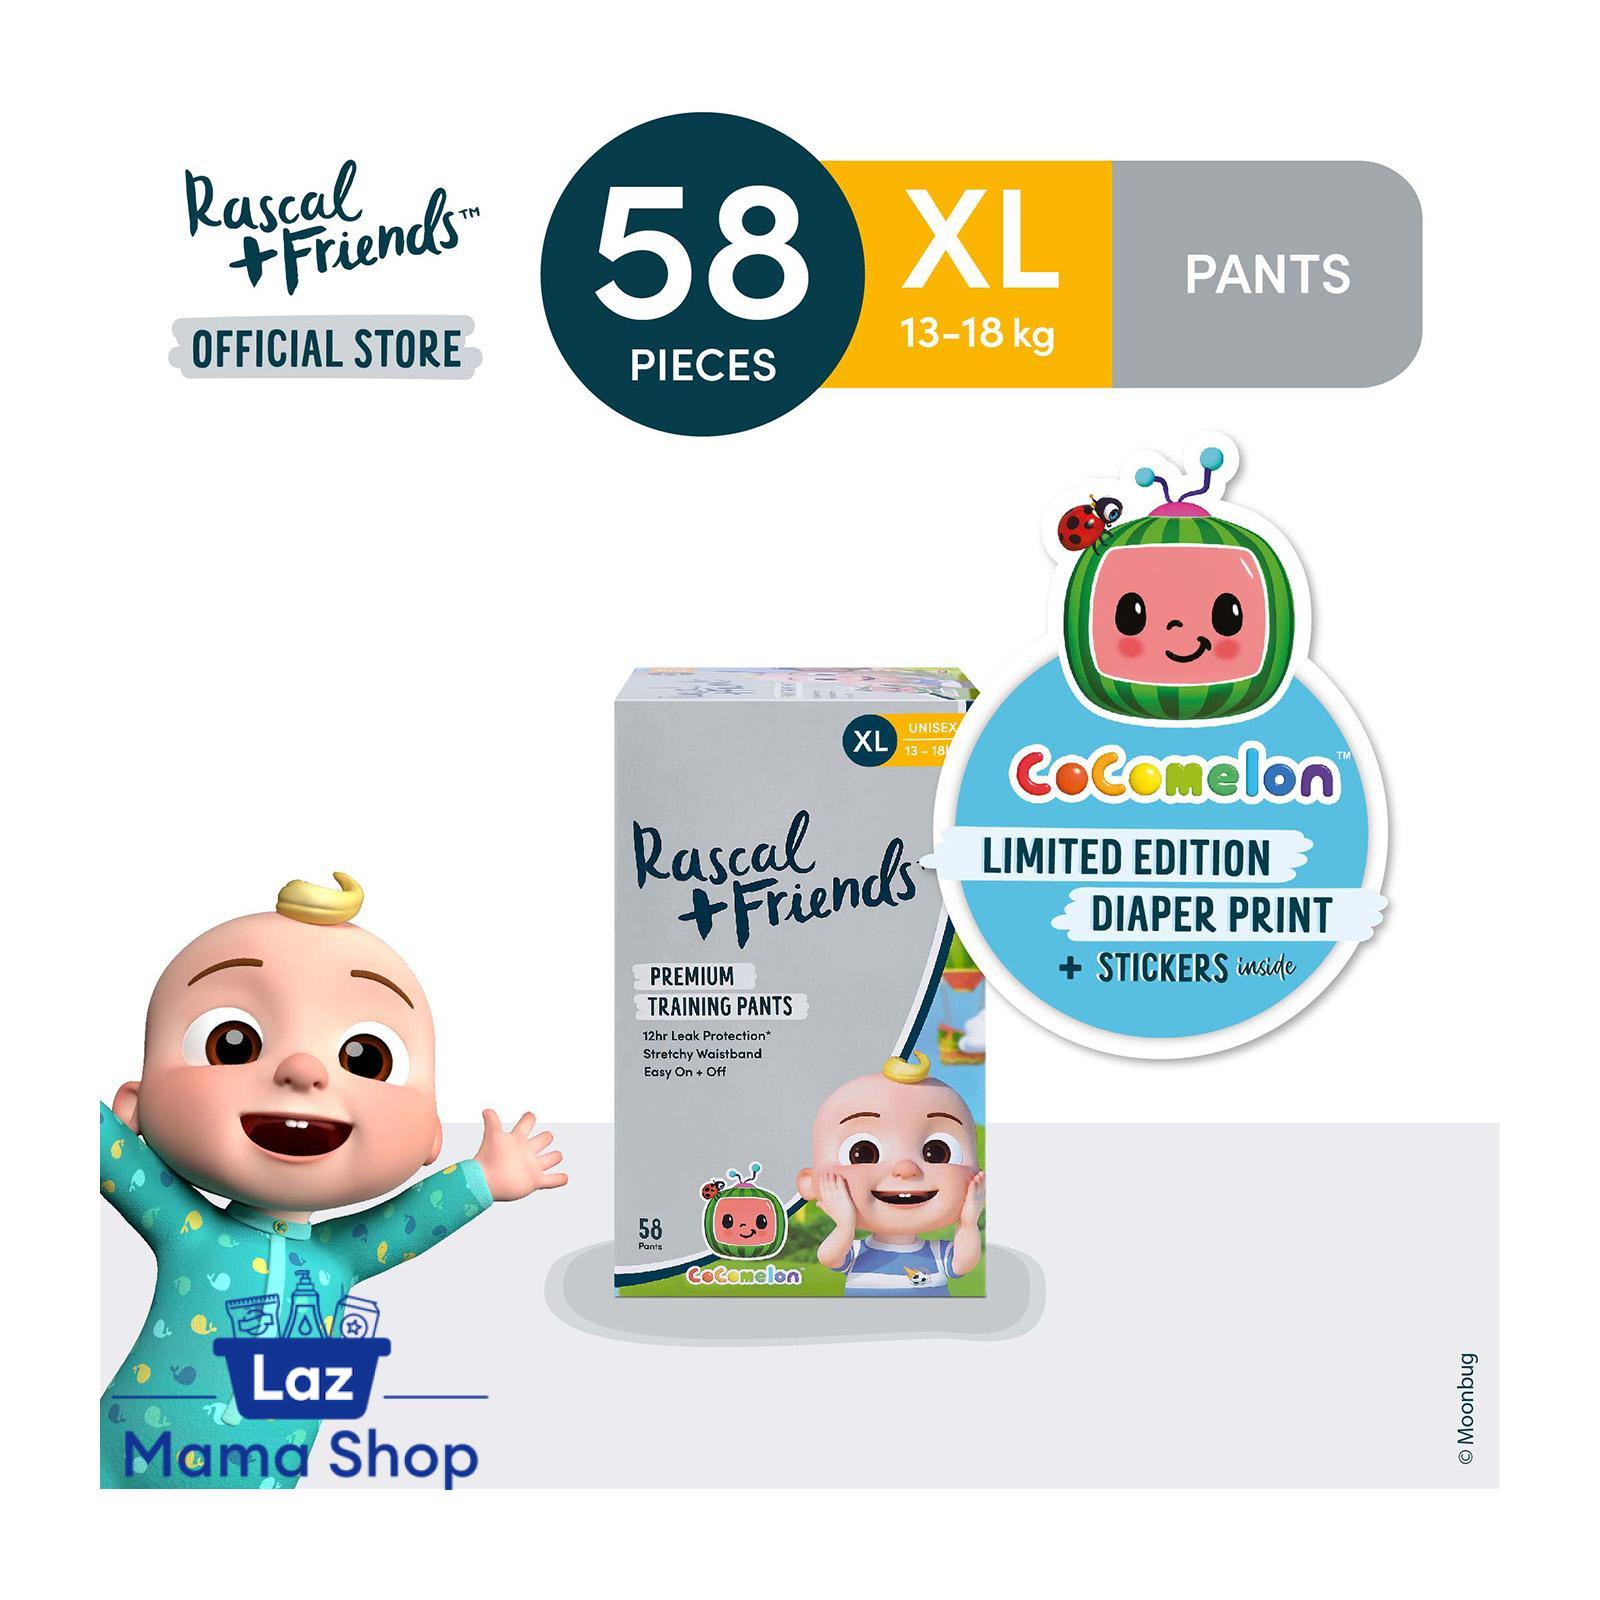 Rascal And Friends Xl Cocomelon - Best Price in Singapore - Dec